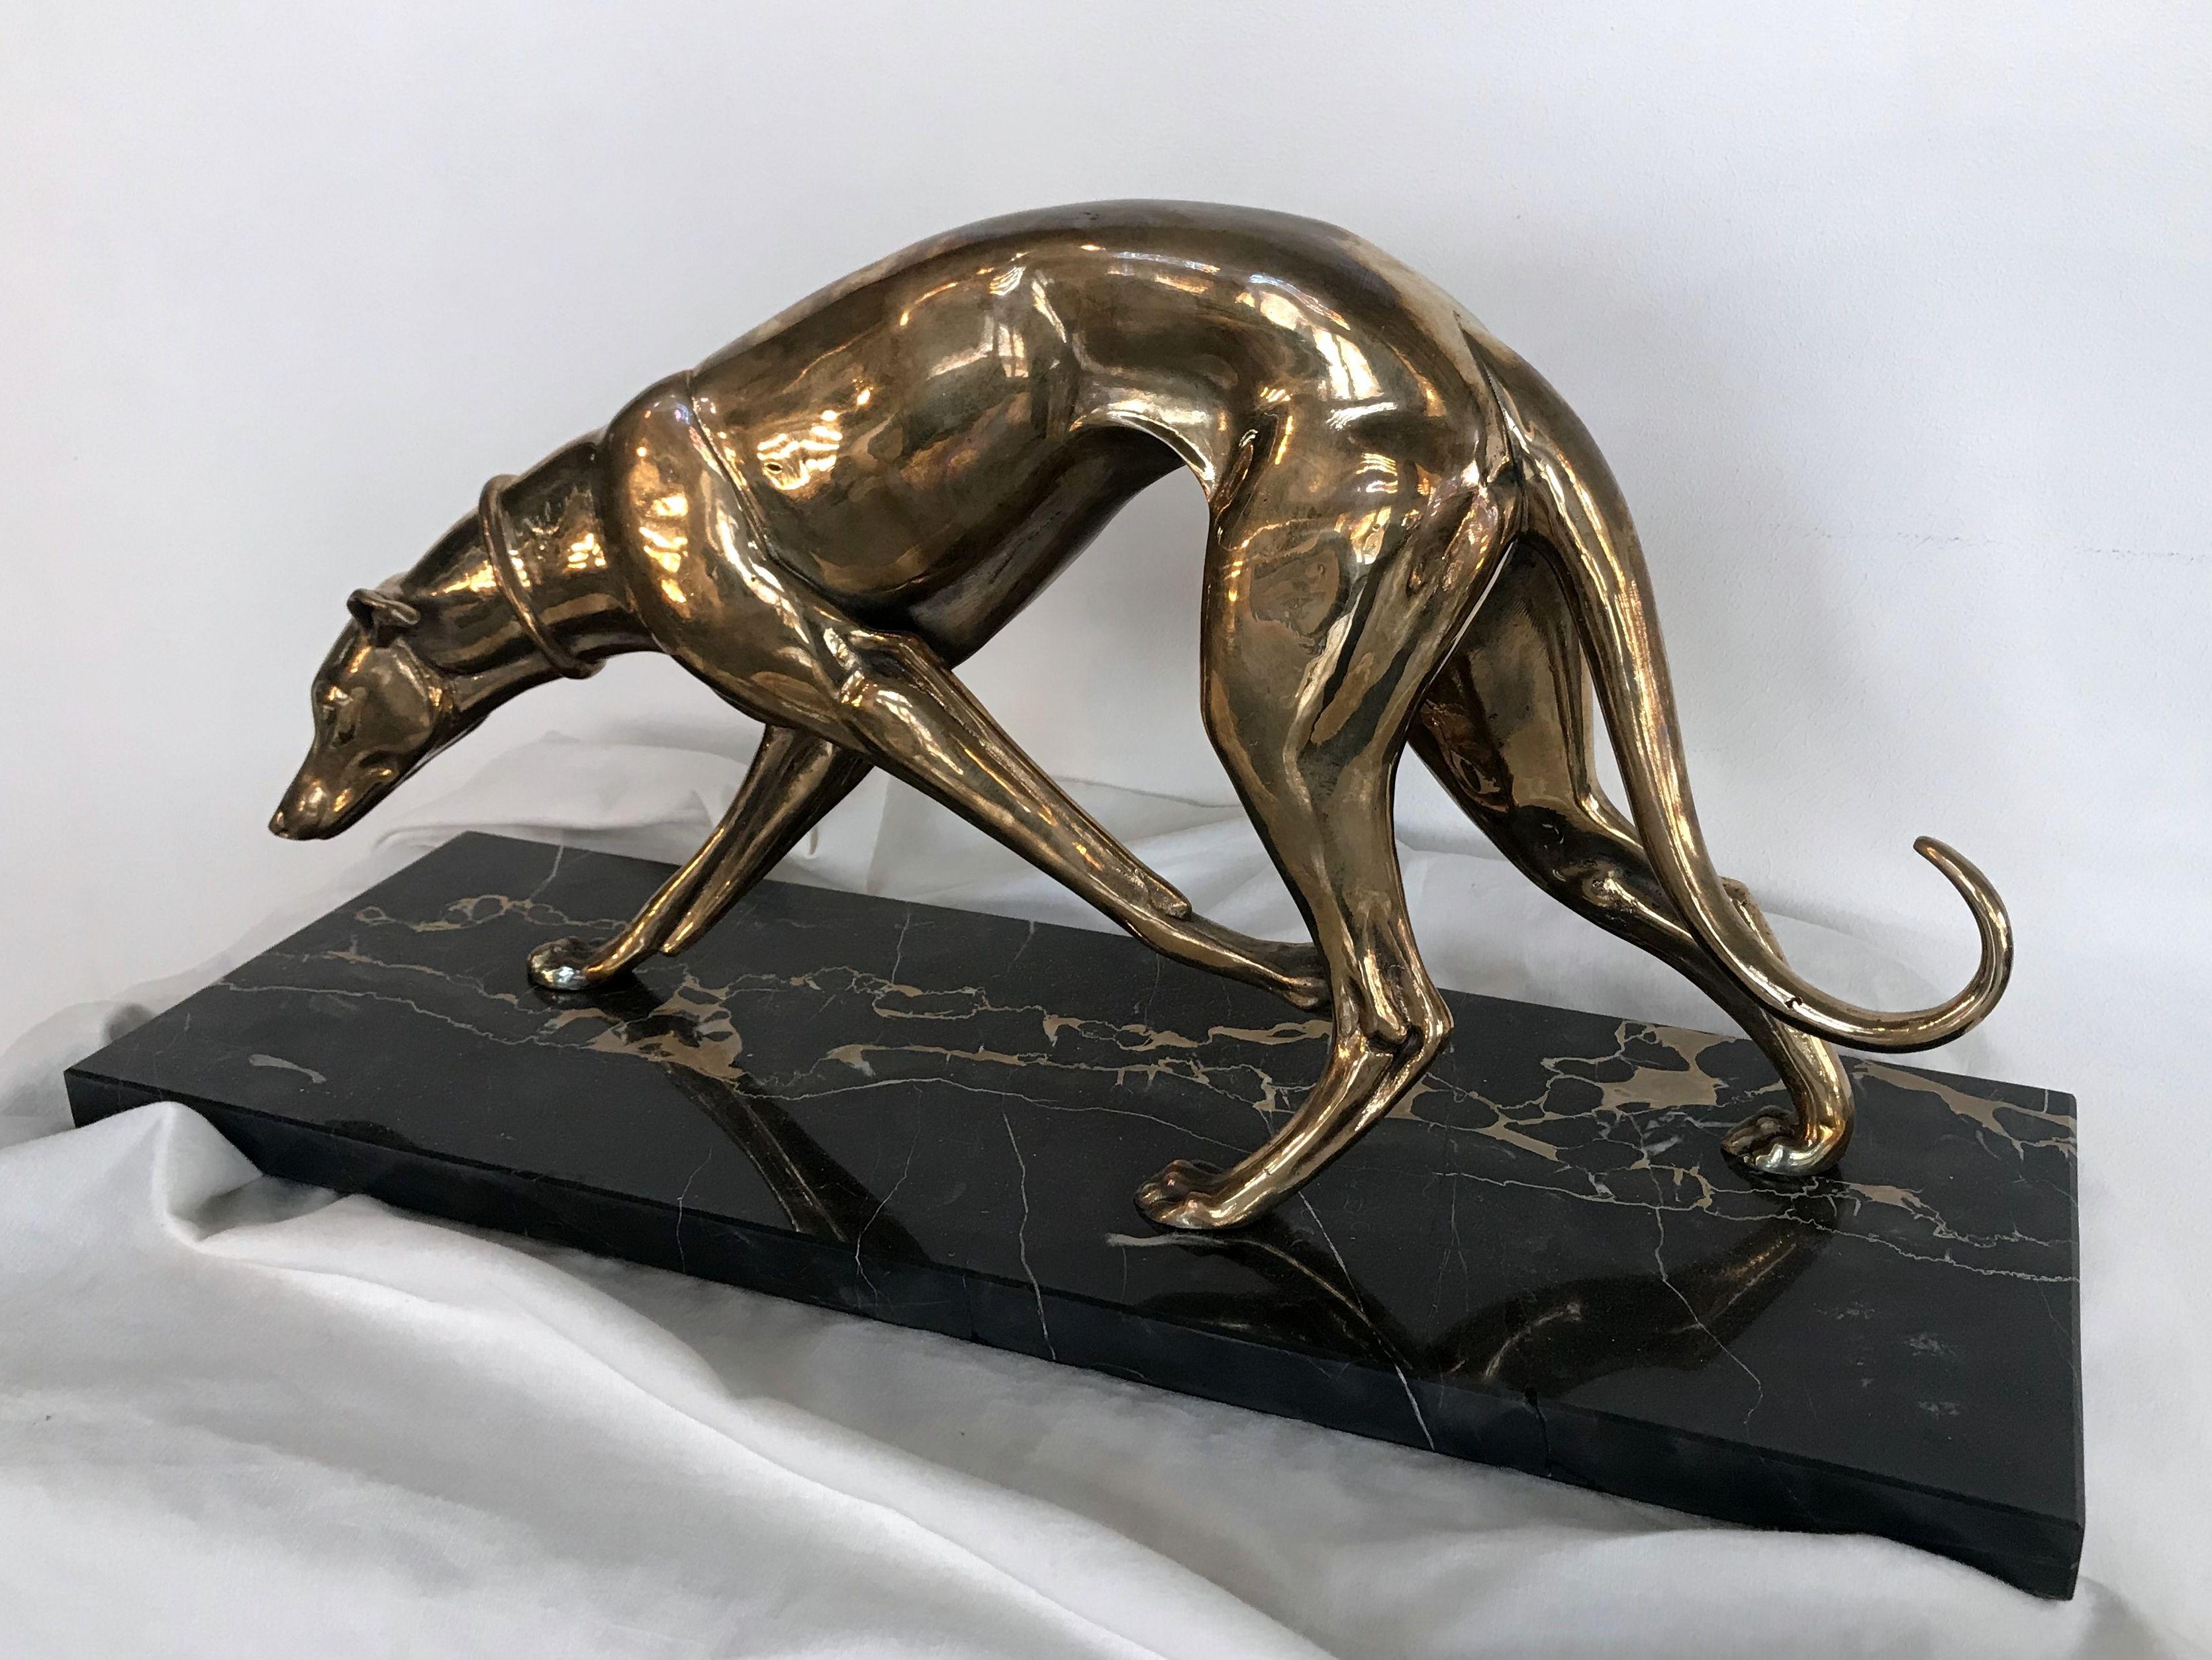 Polished French Art Deco Bronze Greyhound Sculpture, 1930 For Sale